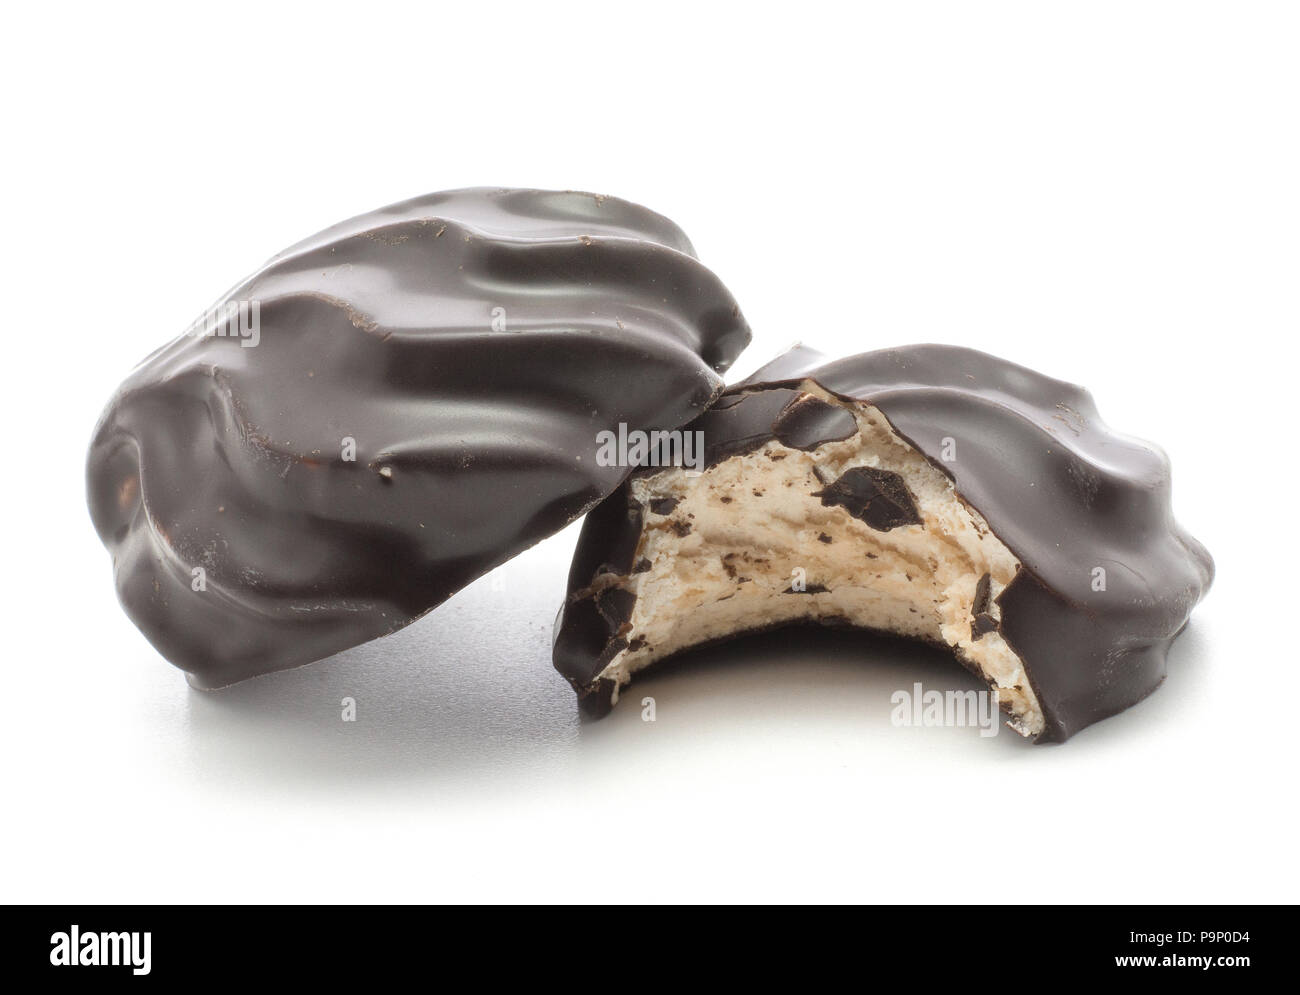 Two dark chocolate-coated zefir isolated on white background one bitten Stock Photo